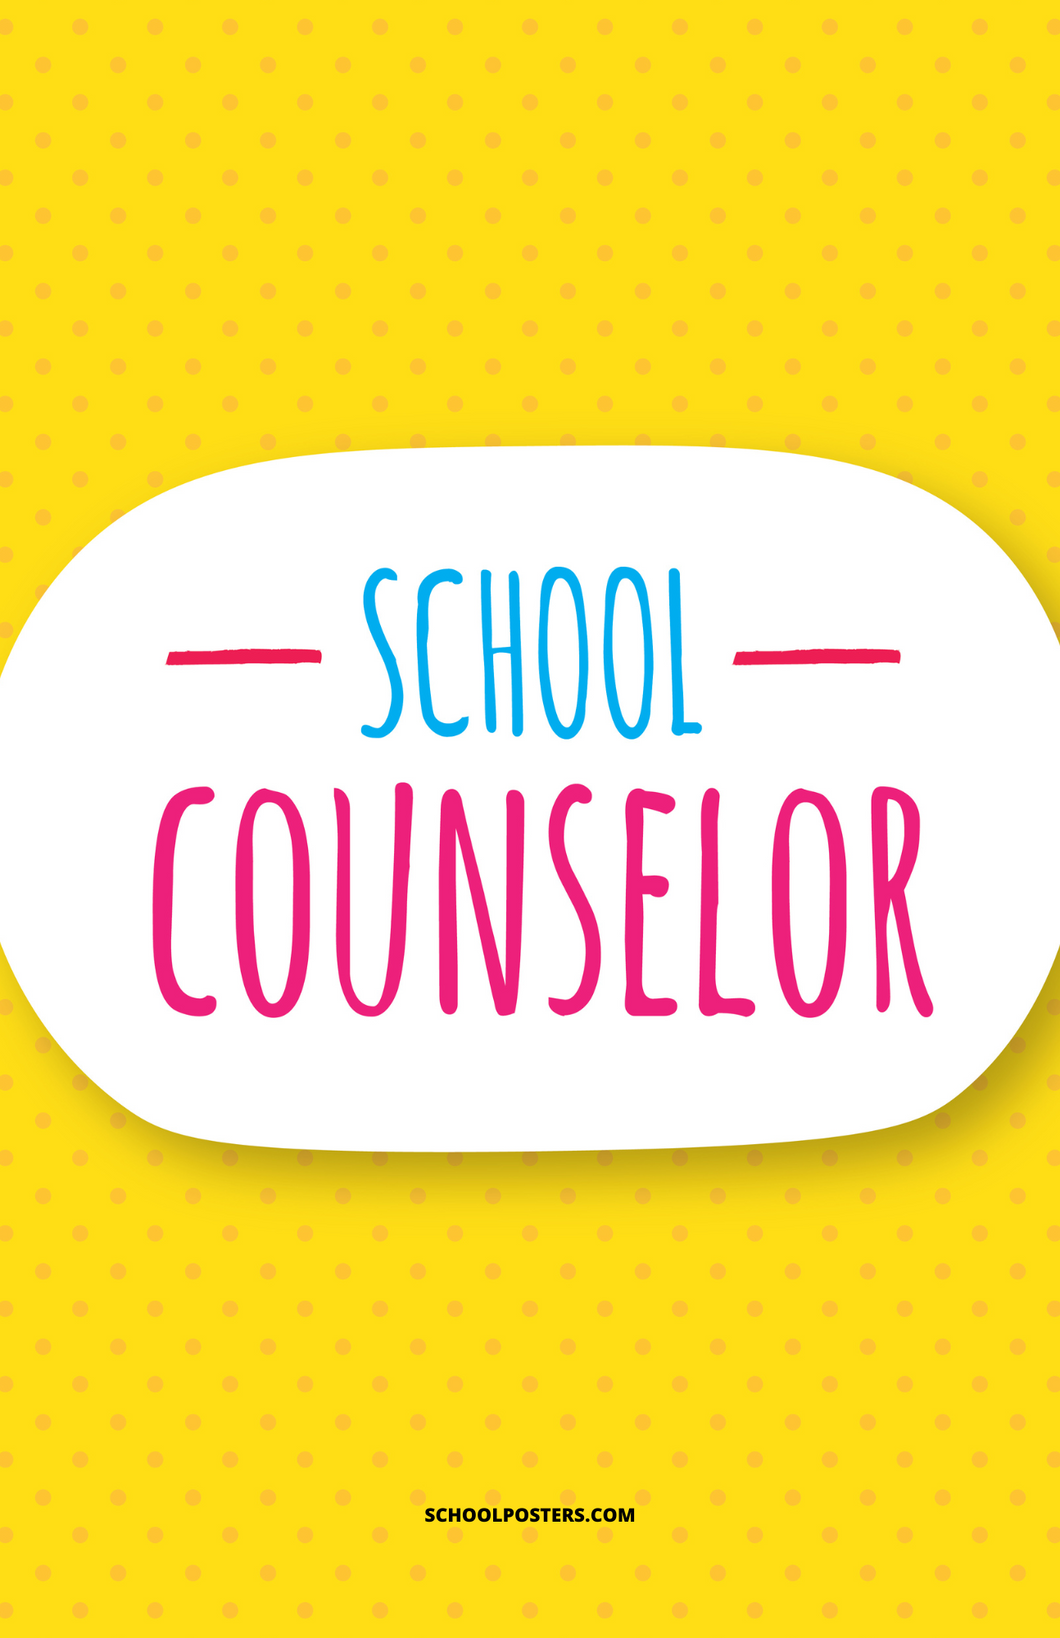 School Counselor Poster